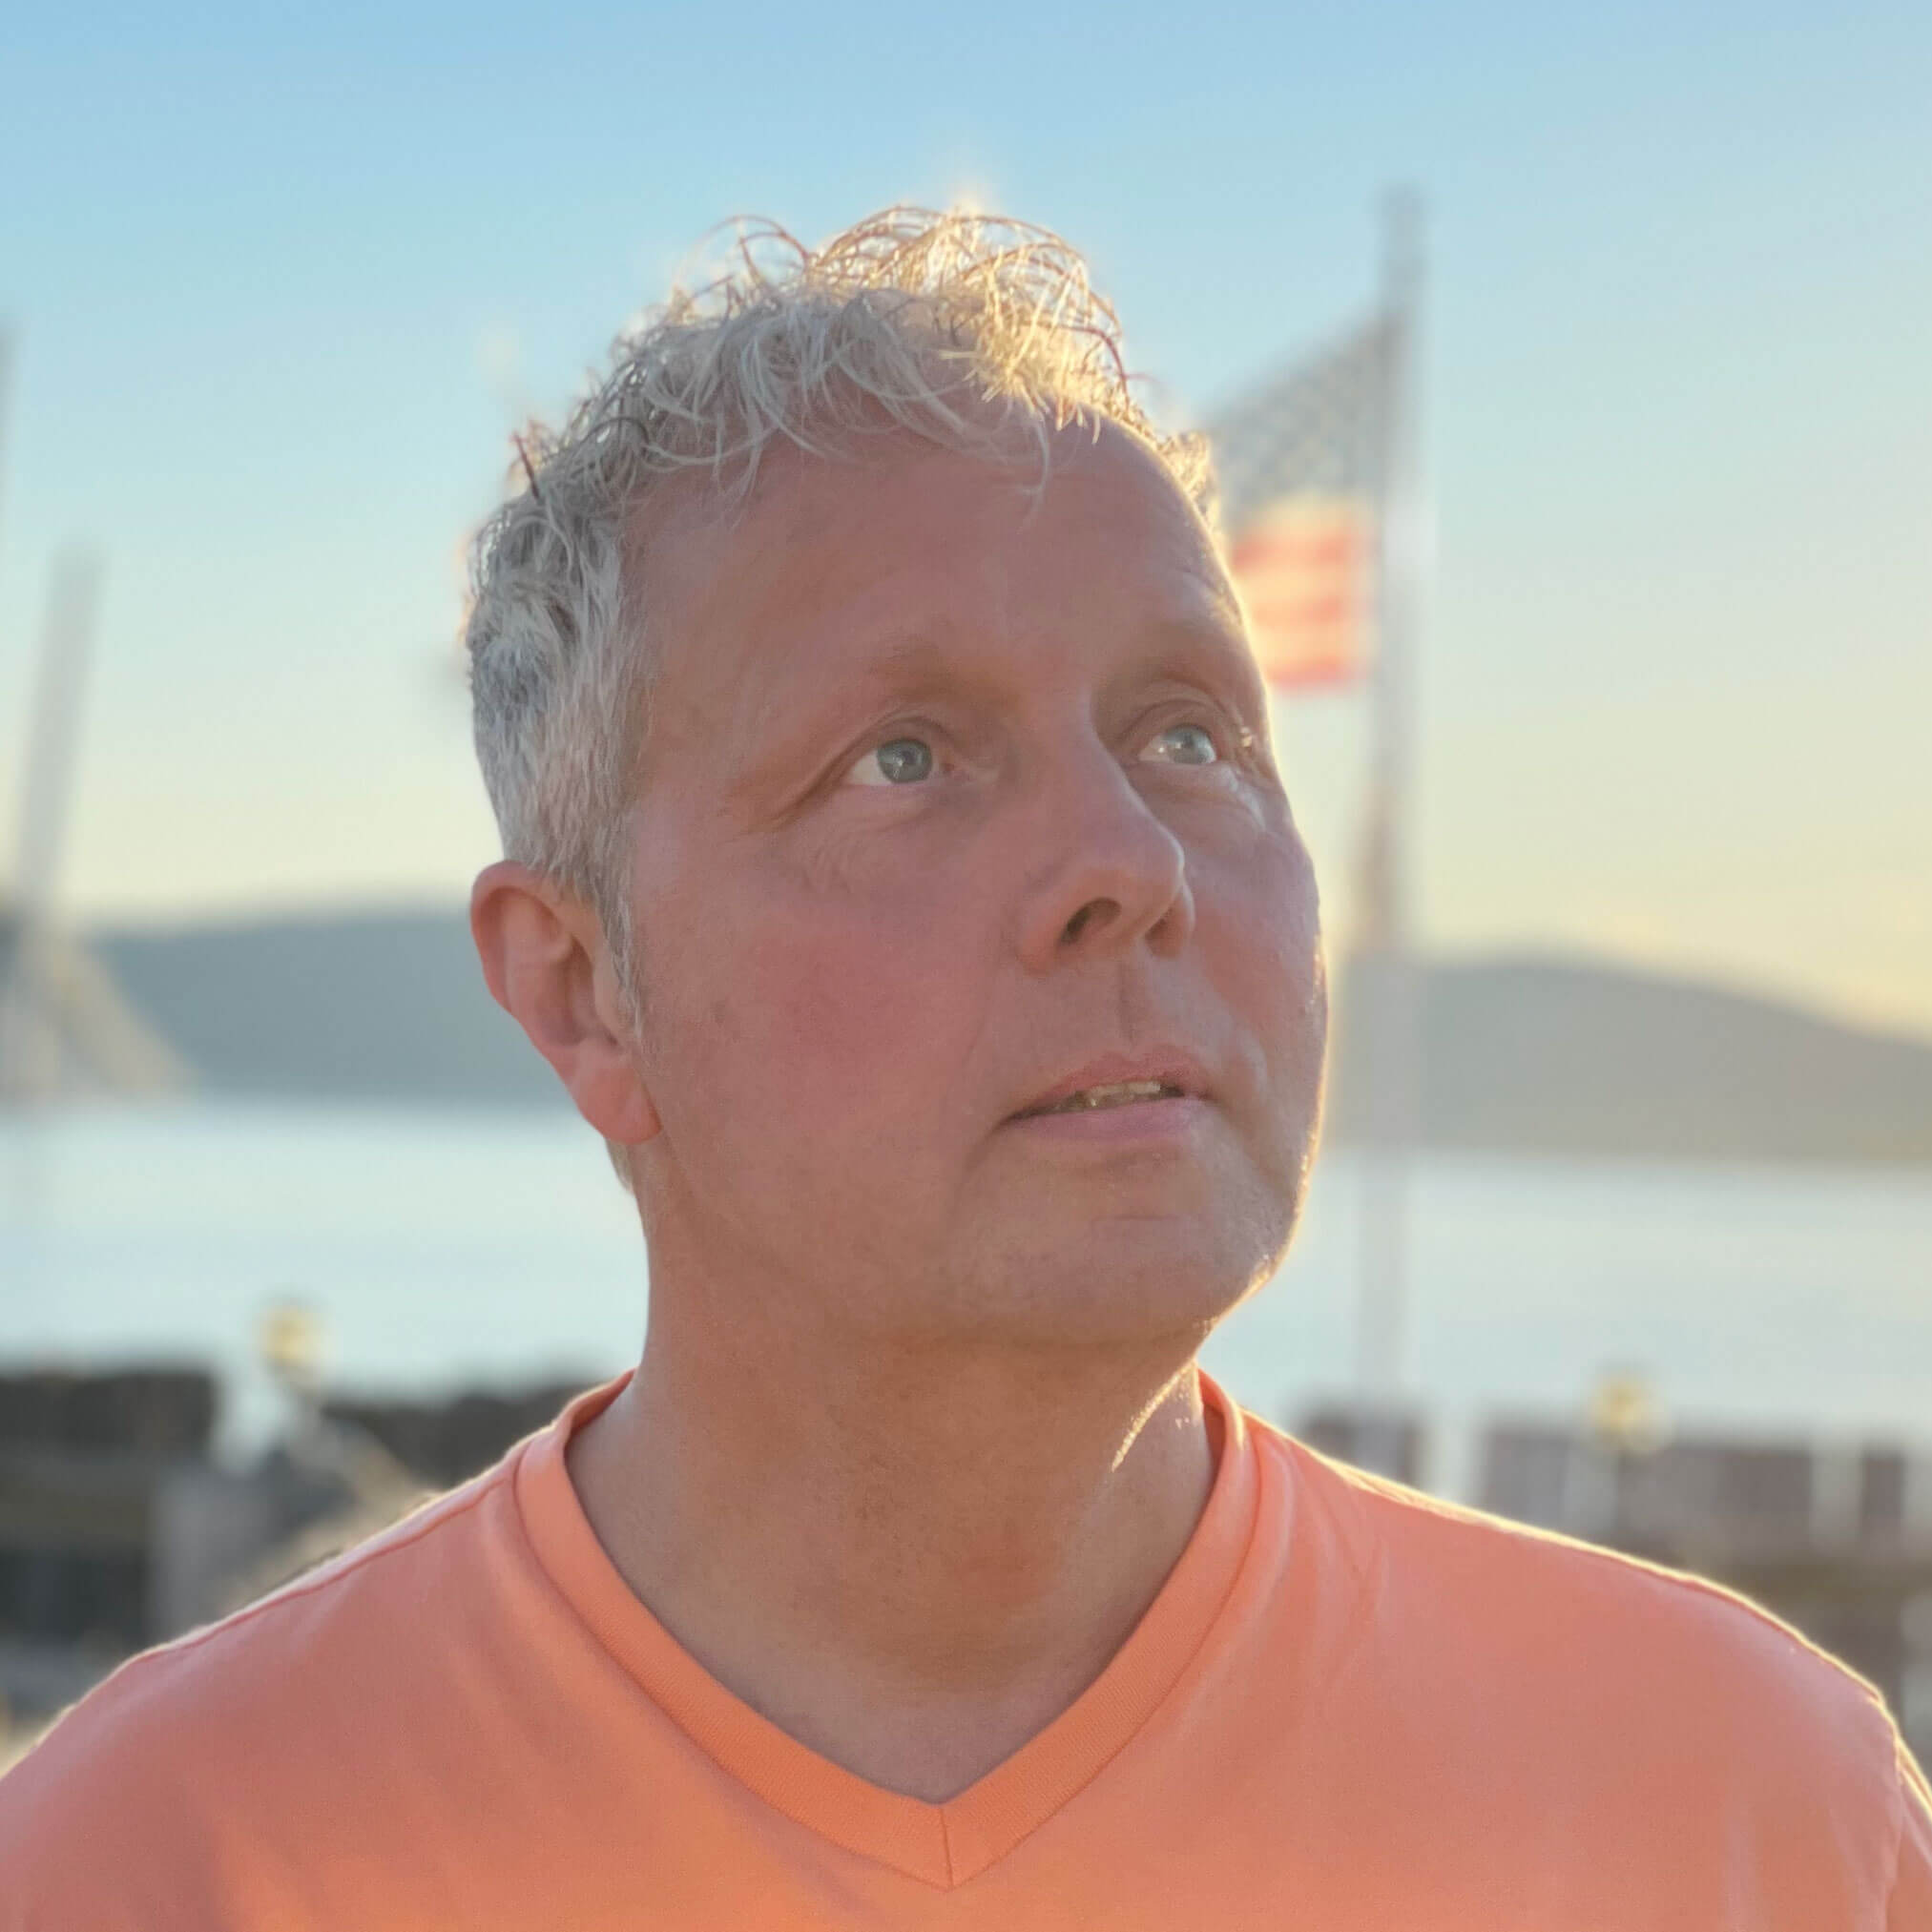 a man in an orange shirt looking off into the distance